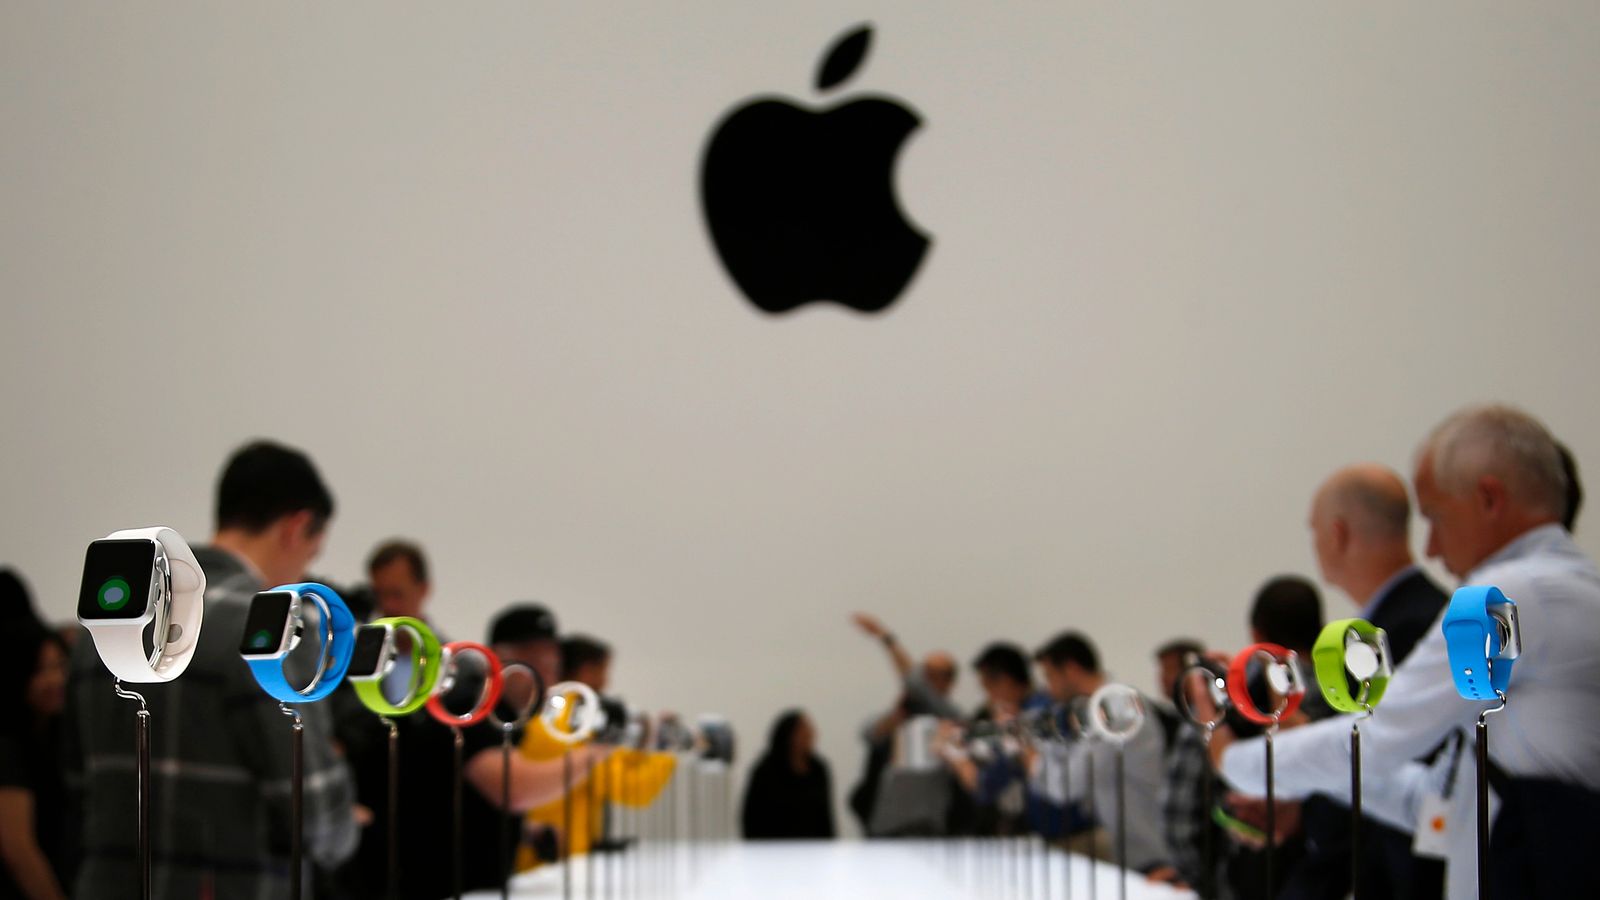 Apple WWDC: Mixed reality headset among announcements expected at tech giant's event